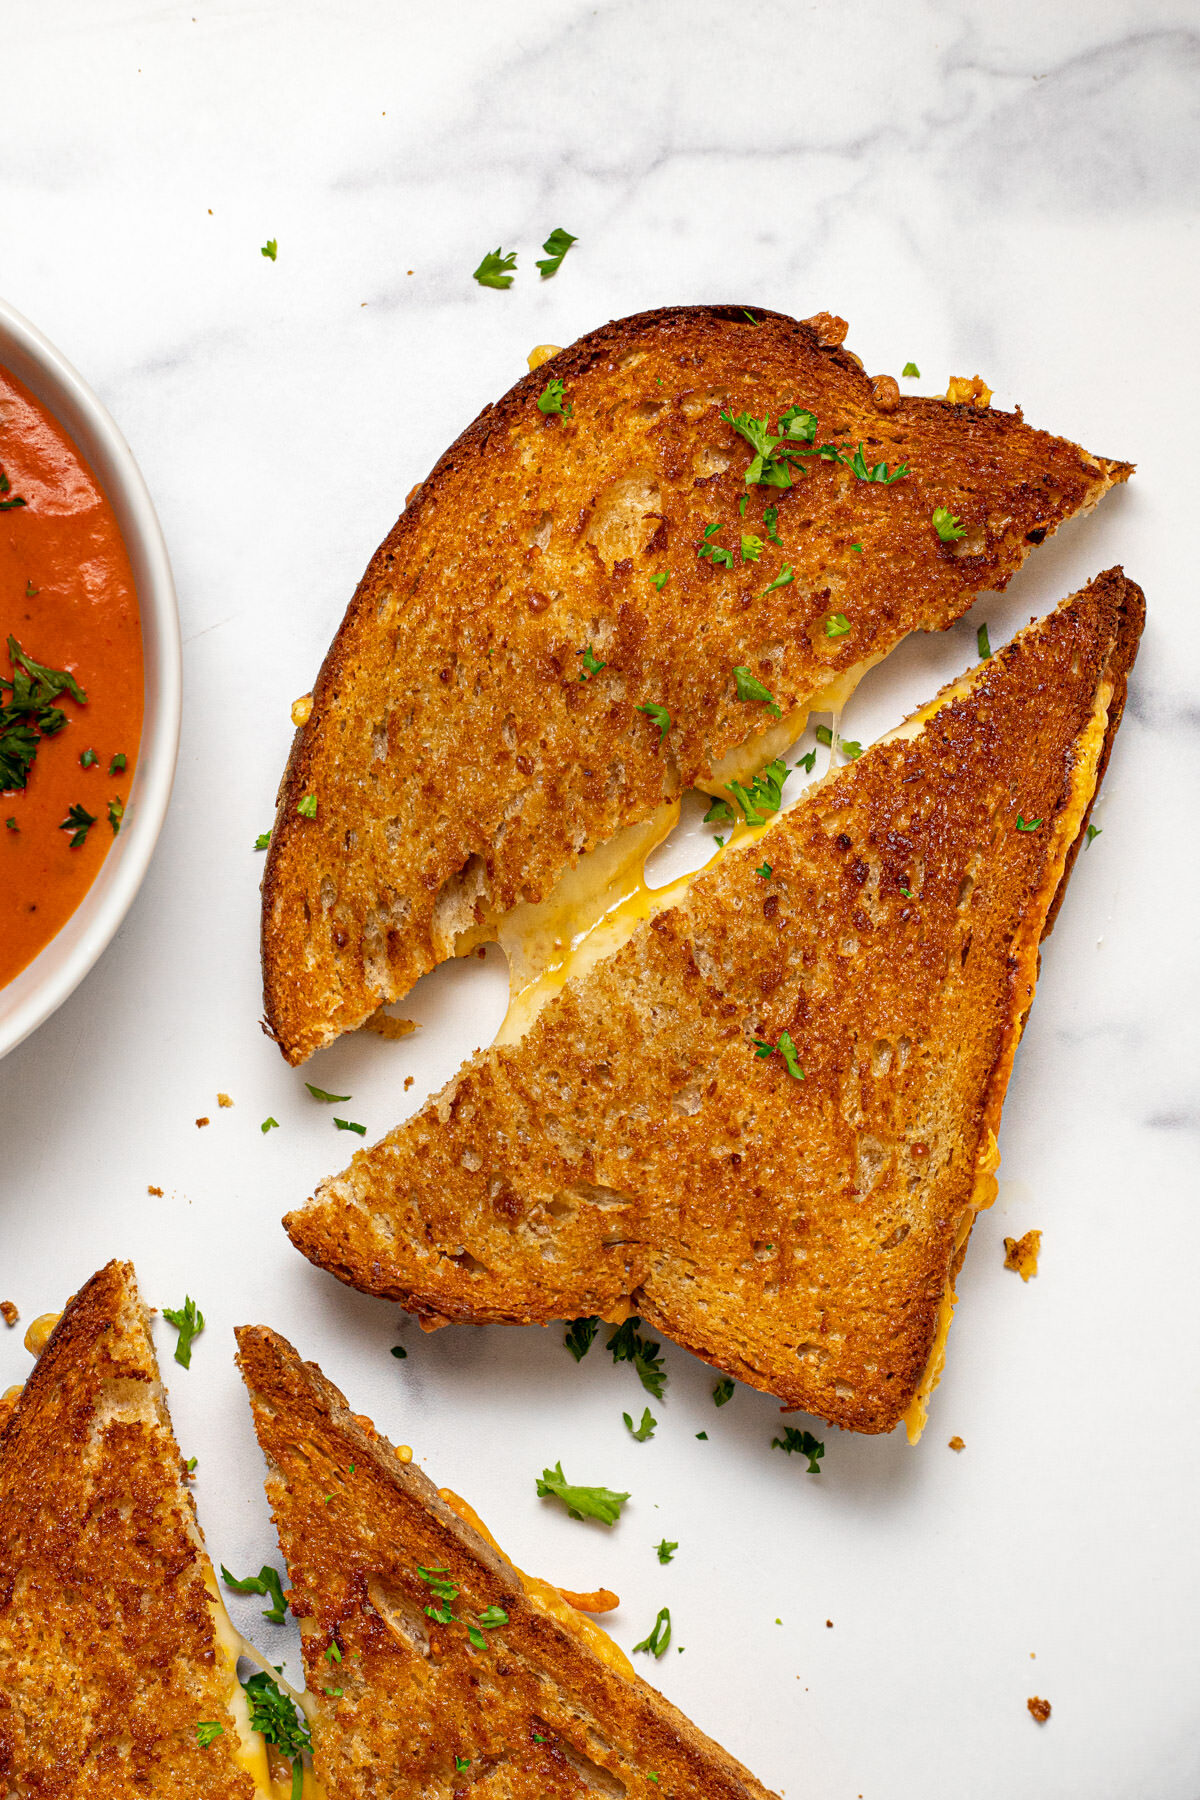 Overhead shot of an air fryer grilled cheese sandwich sliced in half